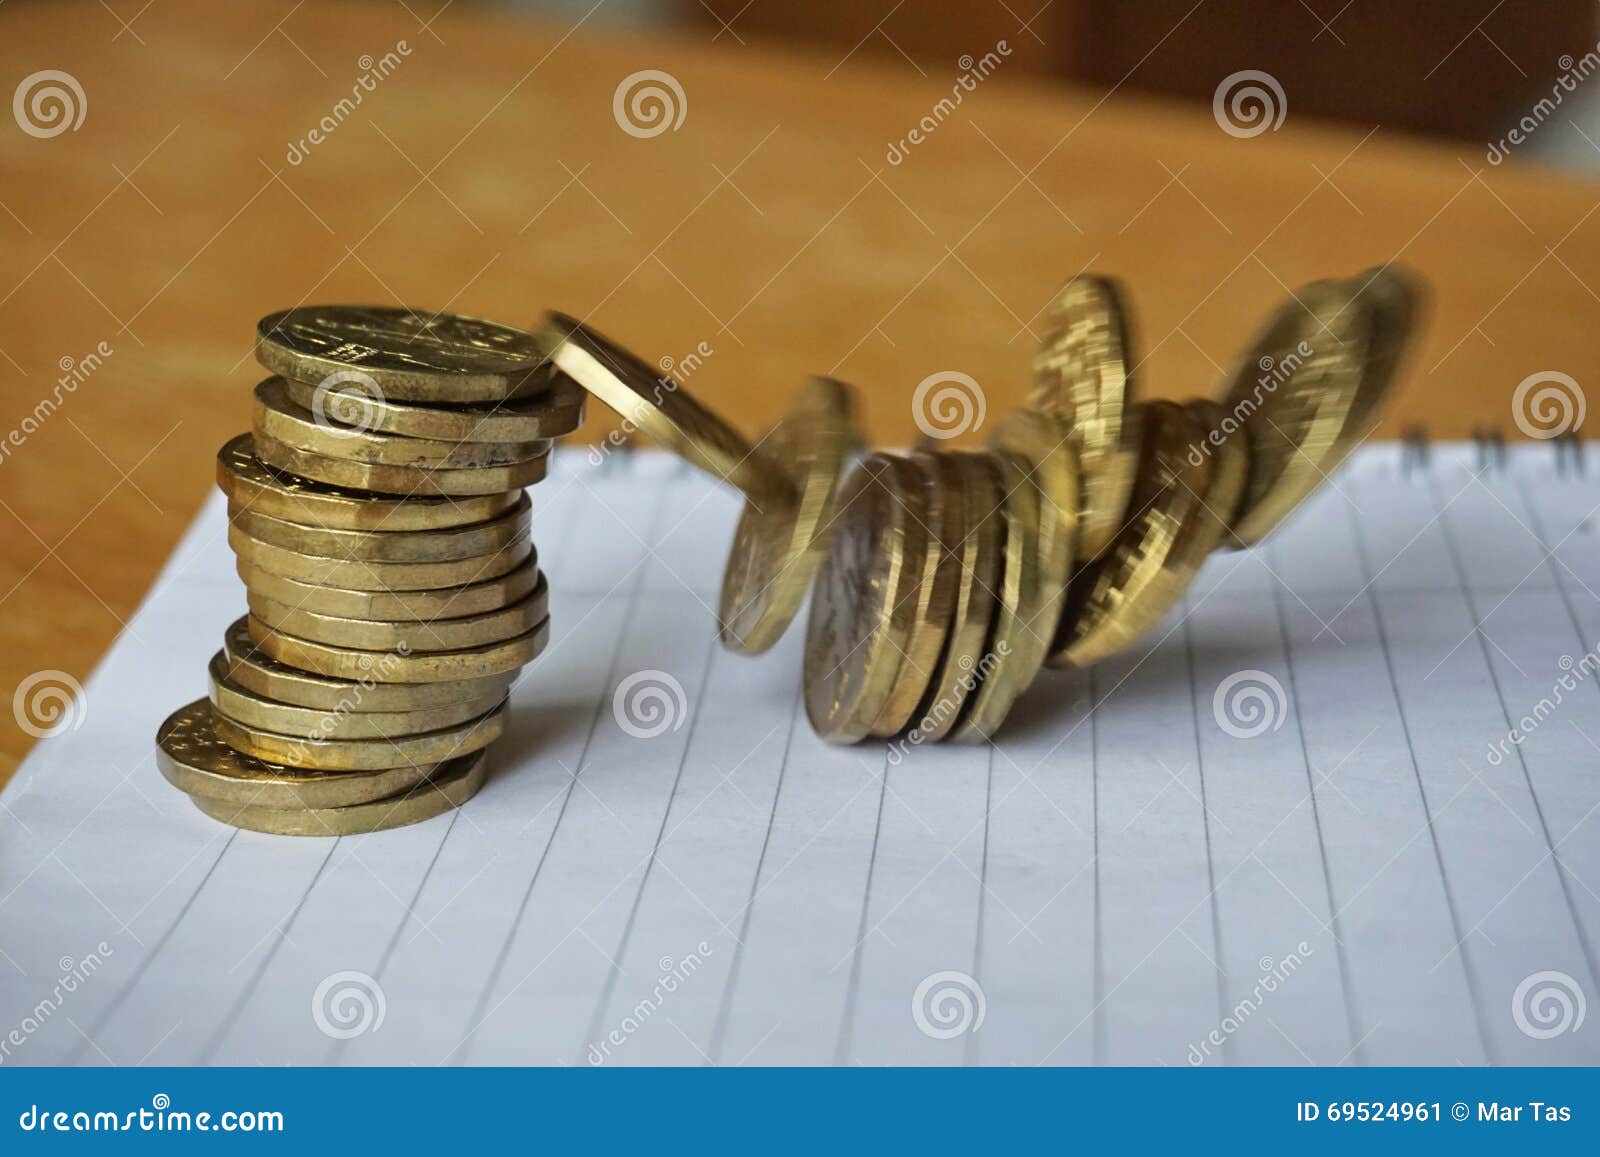 money background of falling pile of coins as a  of financial deterioration